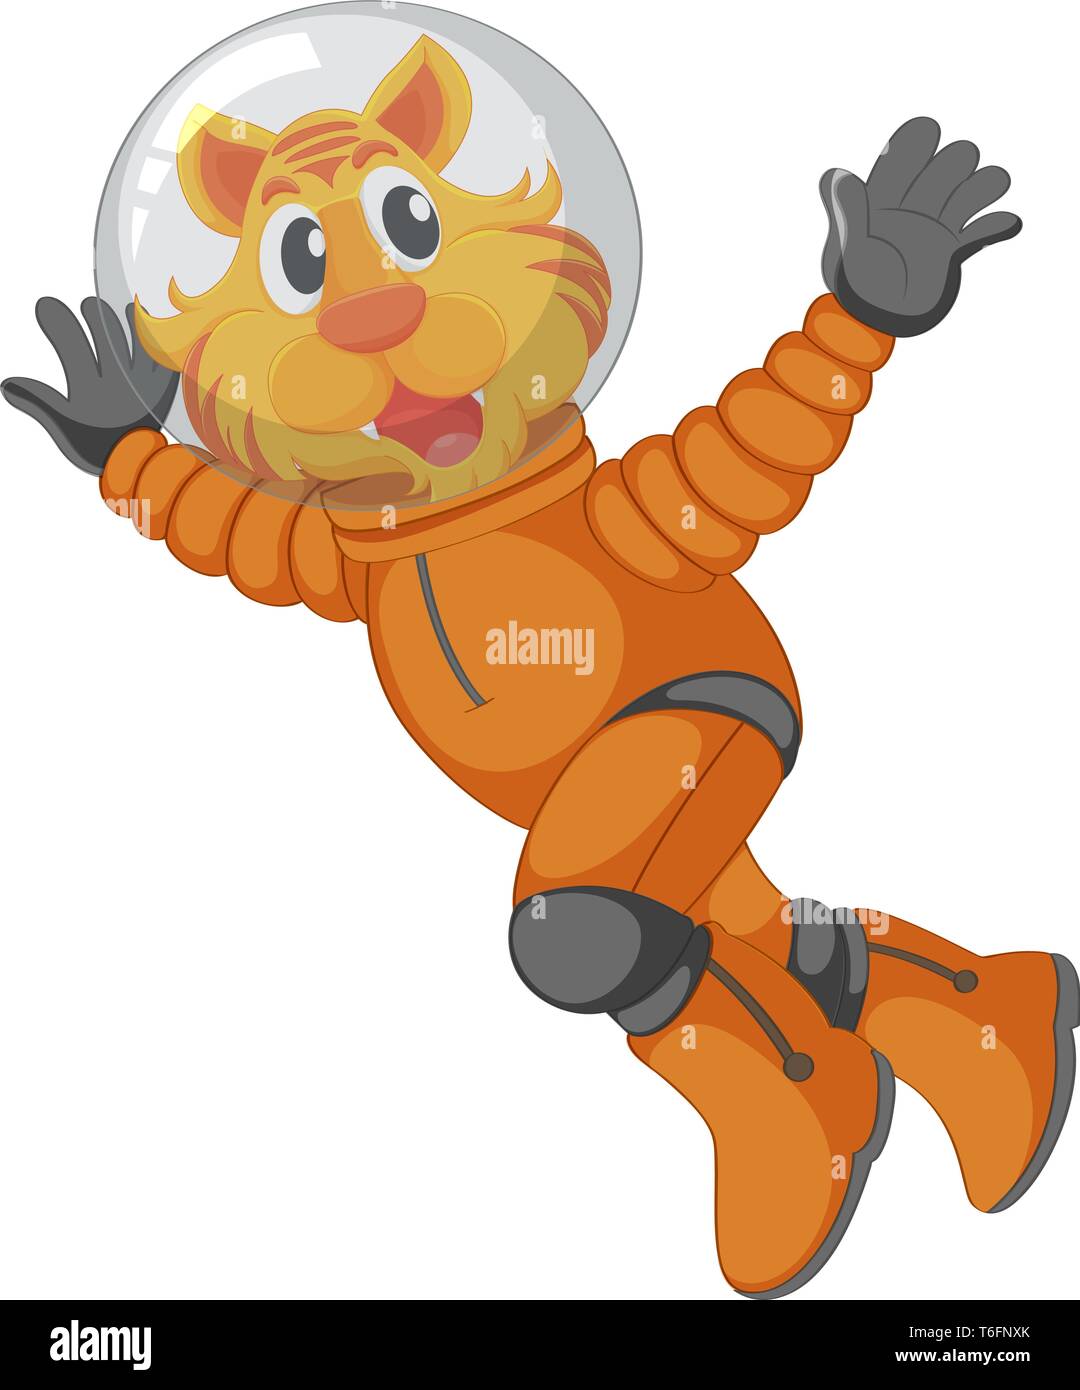 A tiger astronaut character illustration Stock Vector